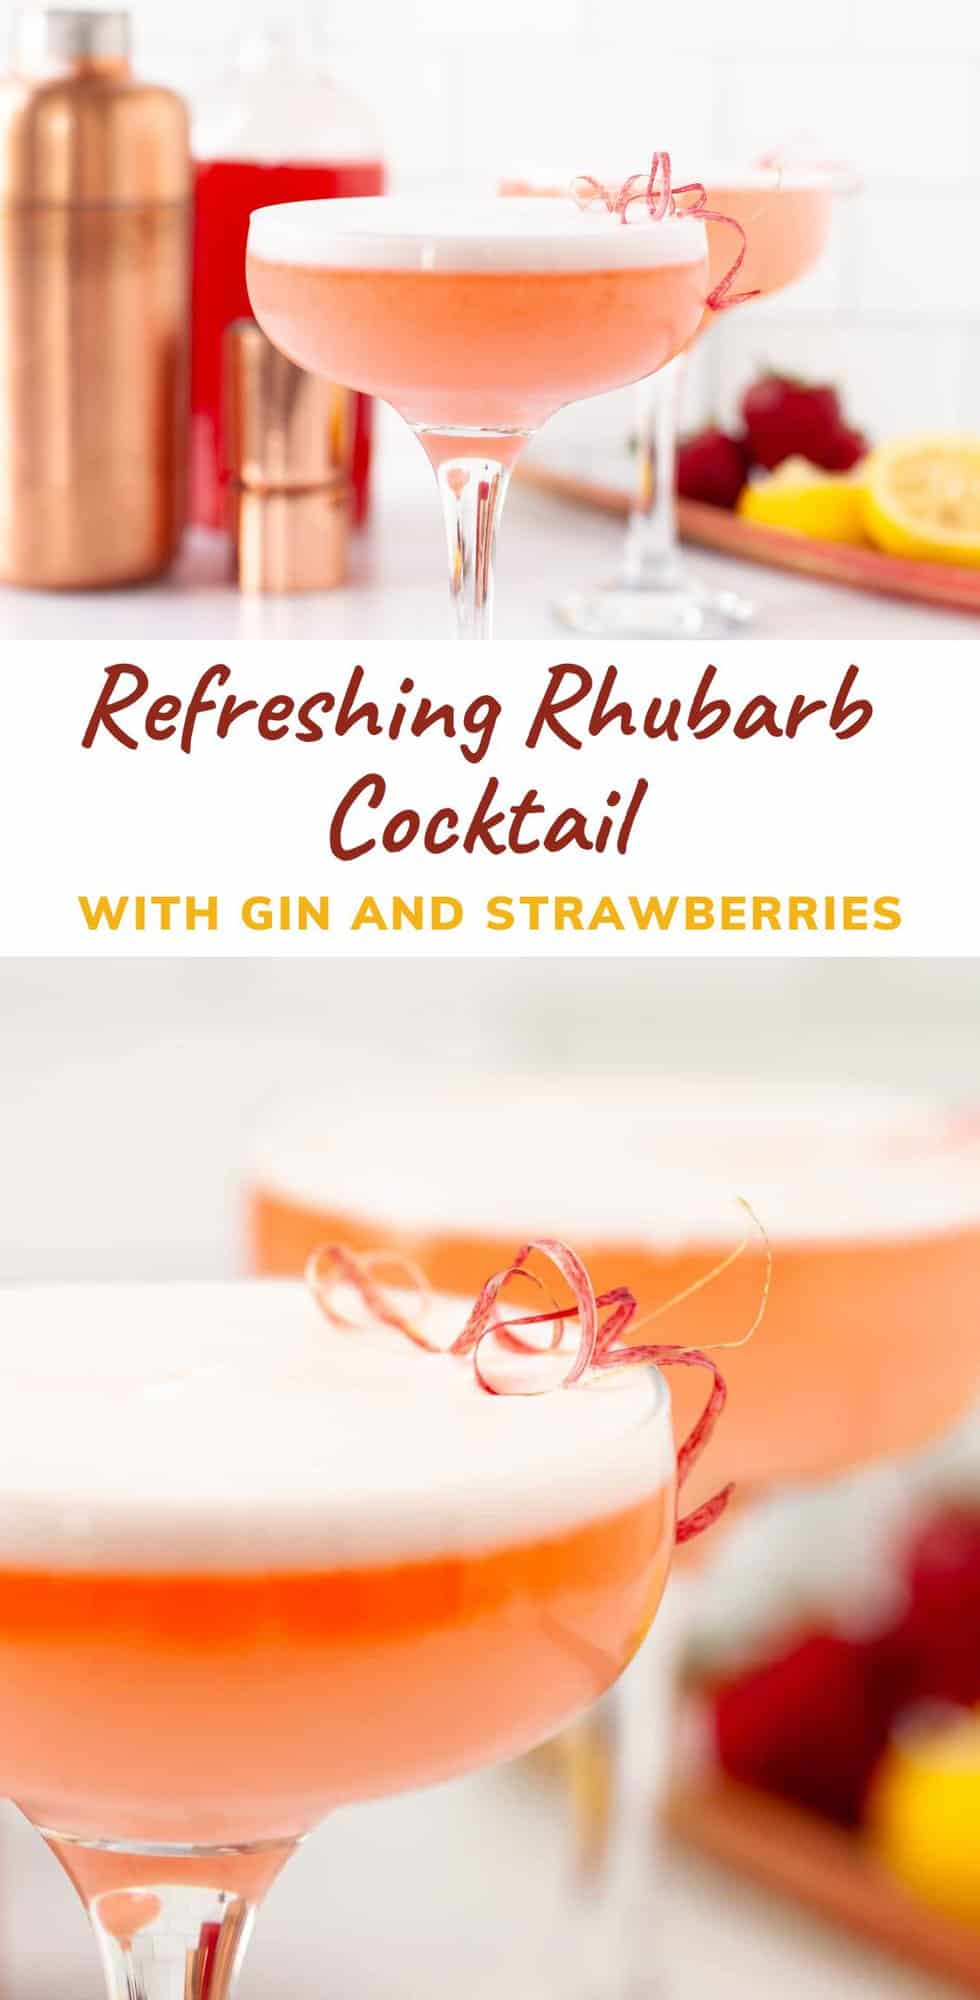 Refreshing Rhubarb Cocktail with Gin